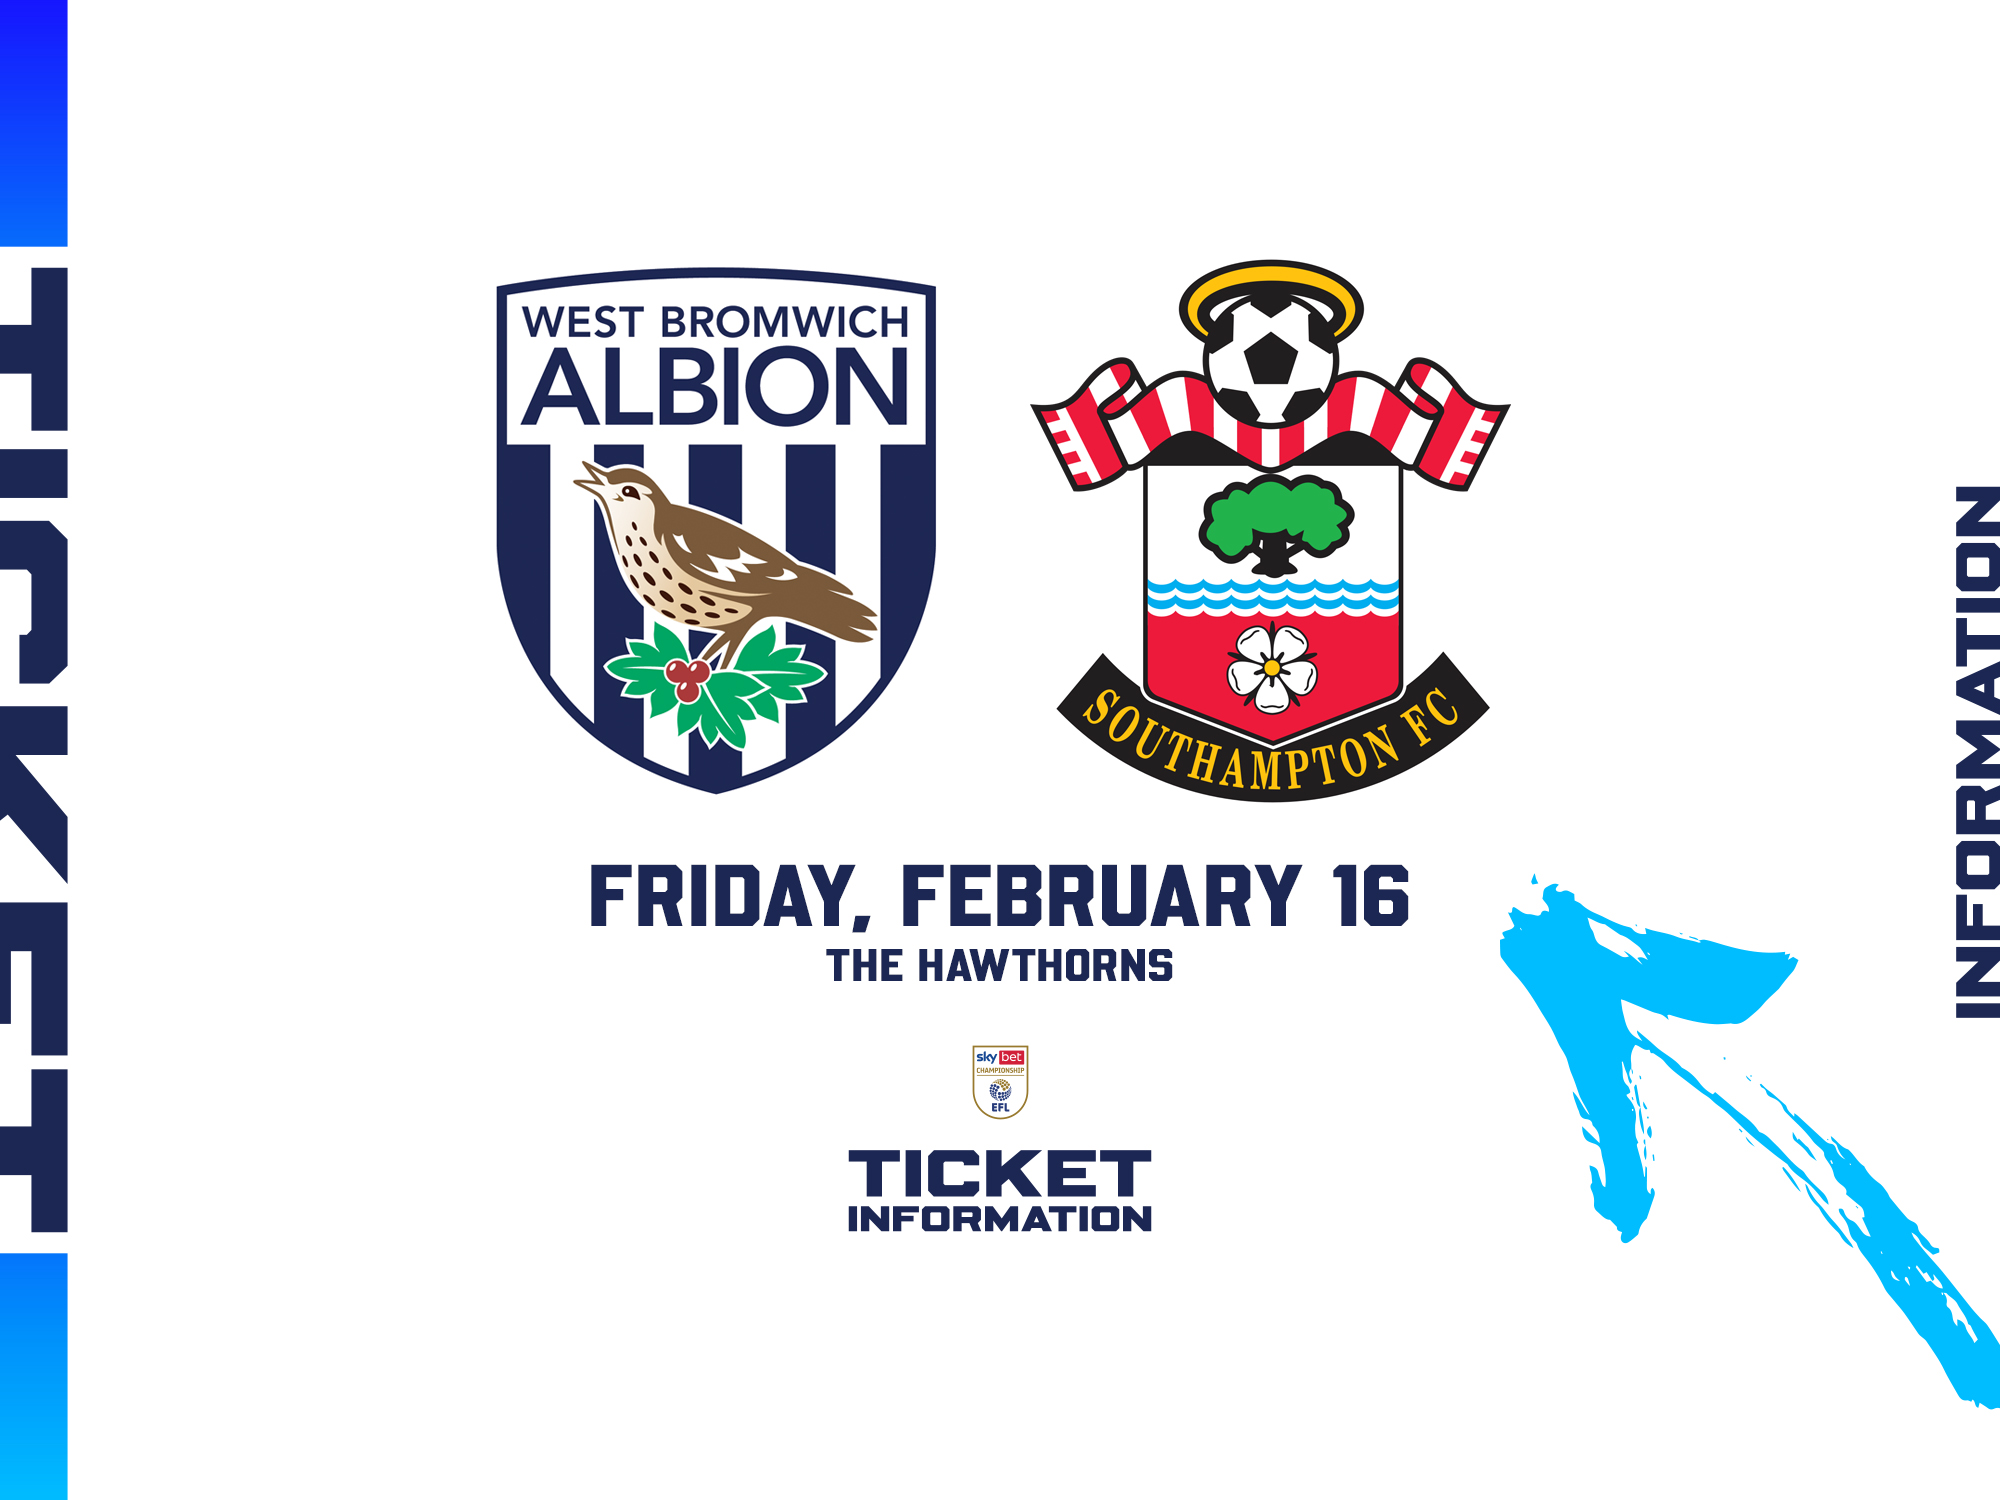 A ticket graphic displaying information for Albion's game against Southampton